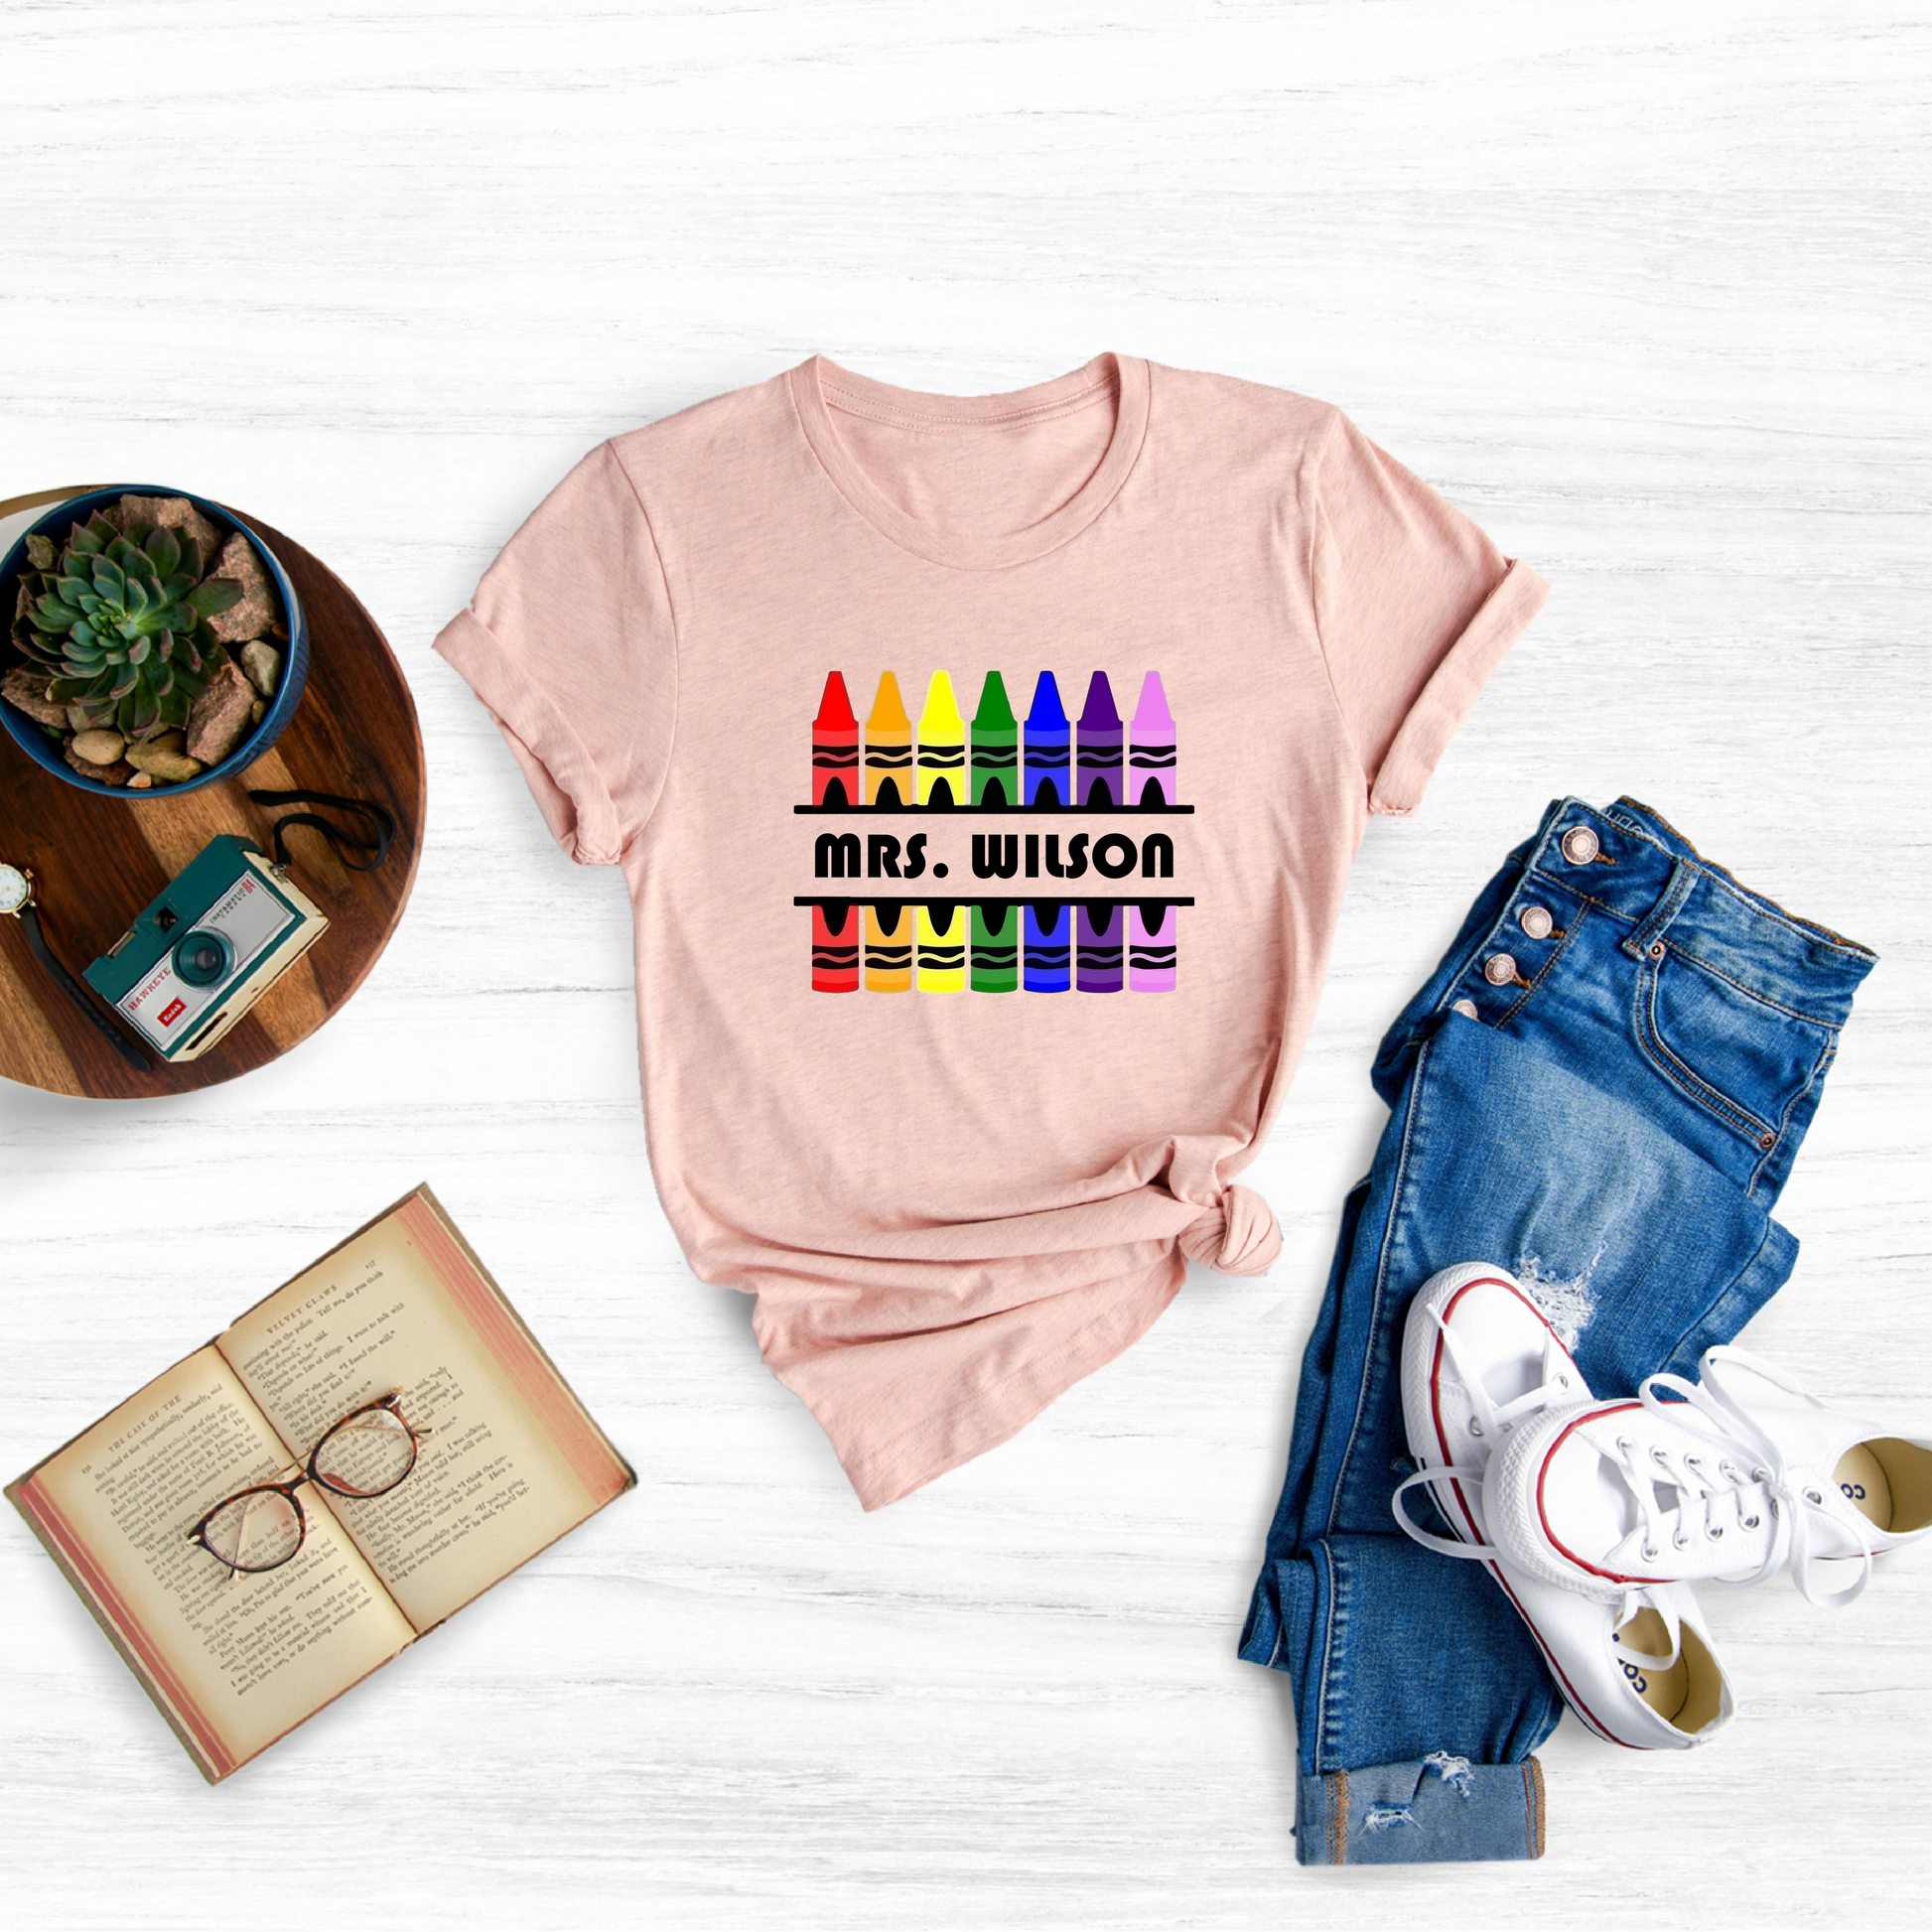 Show your appreciation for the amazing teachers in your life with our personalized "Custom Name Teacher Shirt."